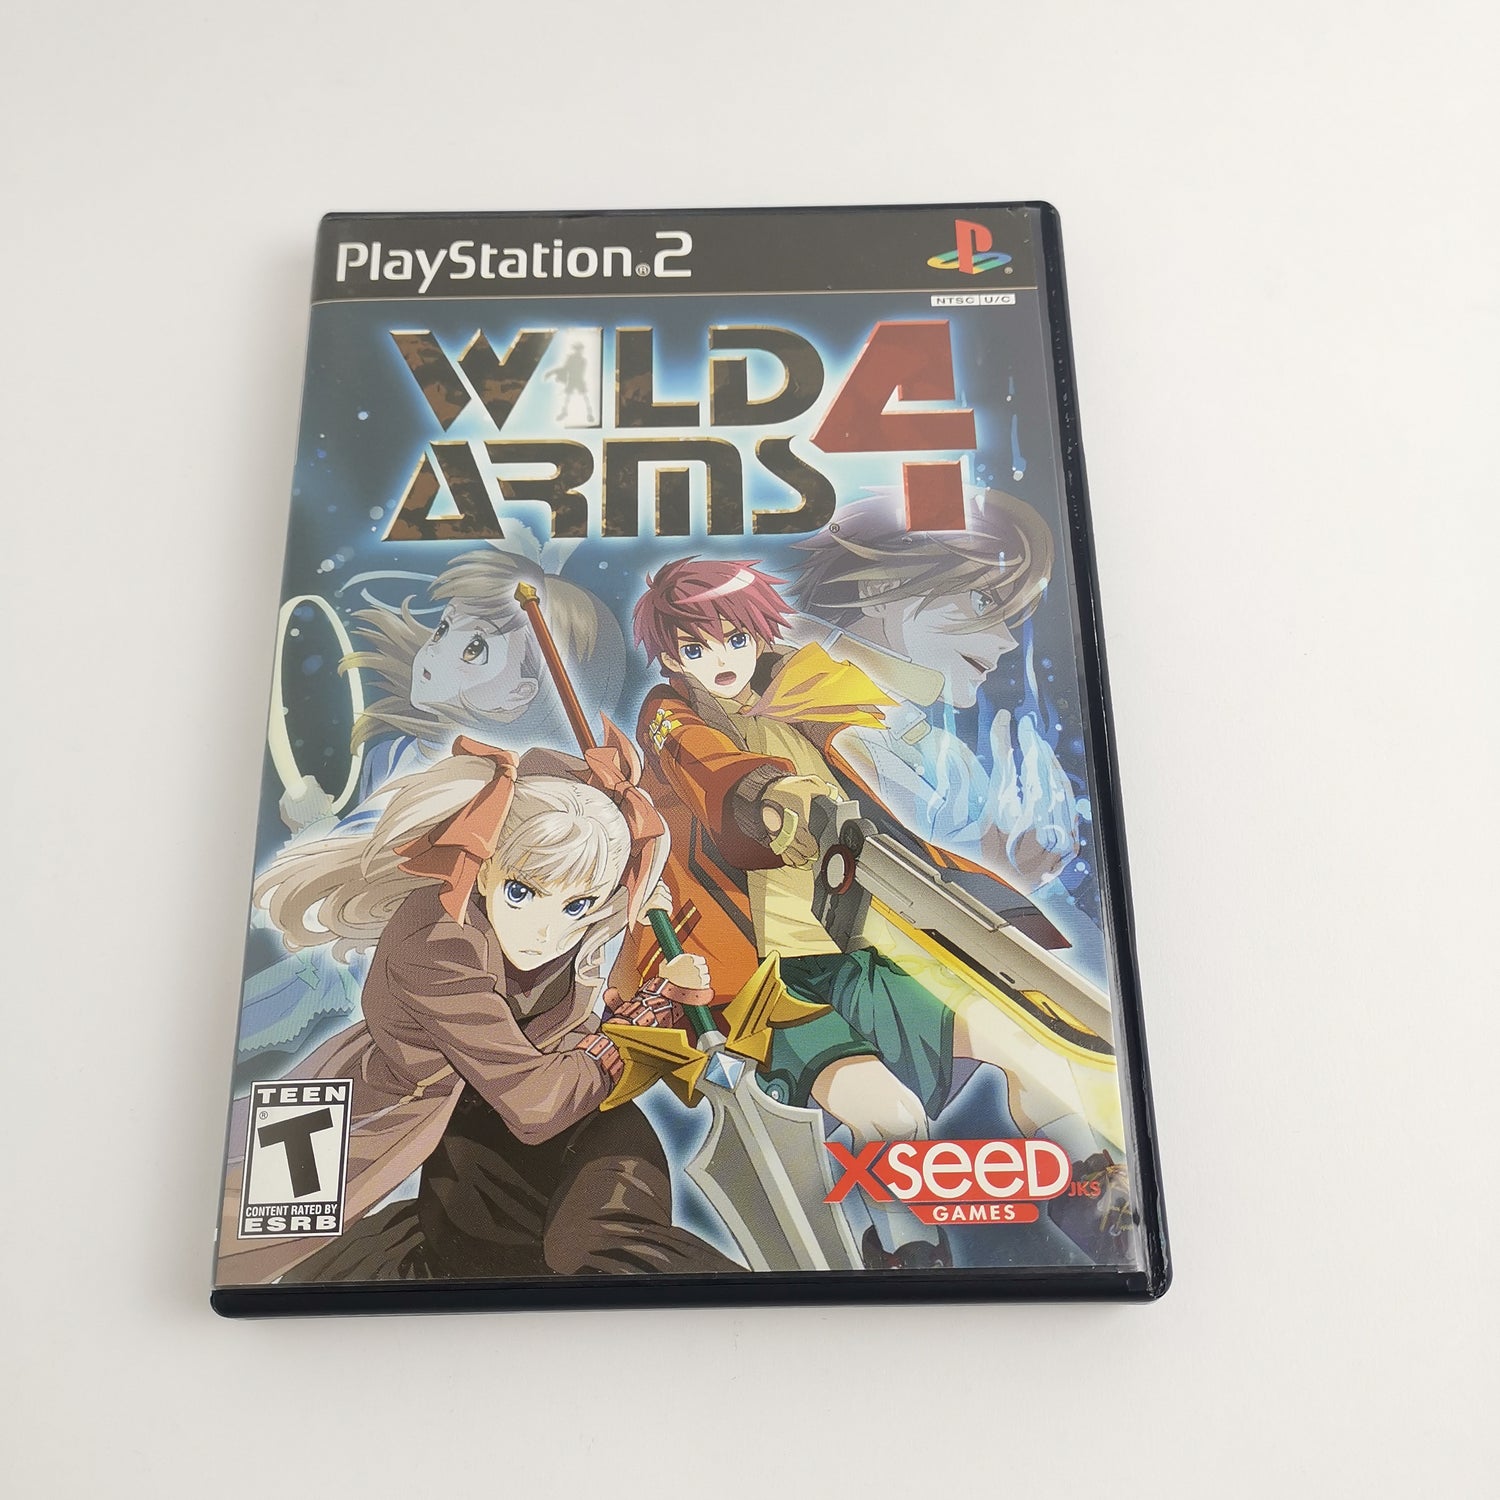 Sony Playstation 2 Game: Wild Arms 4 + Strategy Guide | PS2 OVP NTSC-U/C USA